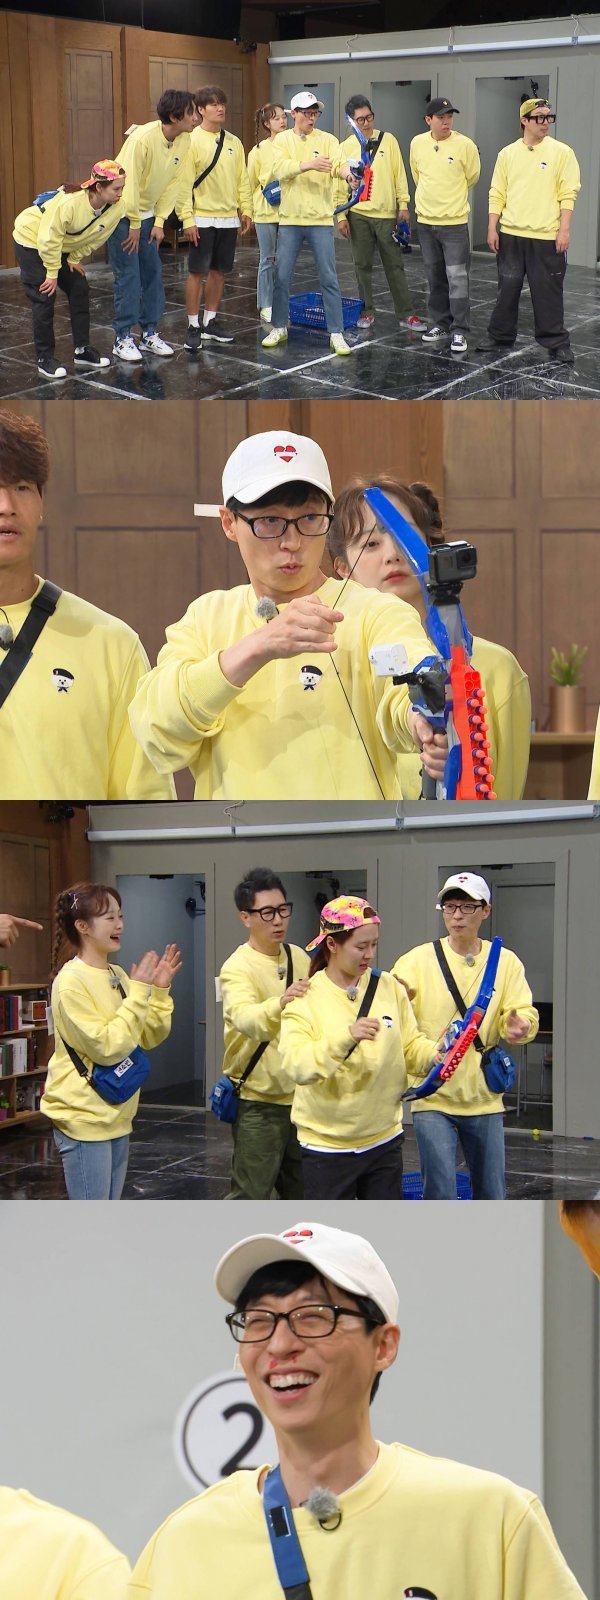 Among the various characters of Yoo Jae-Suk such as Game Urgosis, Jurs Willis, and Yumes Bond, the playful character has recently emerged.On SBSs official YouTube channel, the video of the most exciting mischievous Yoo Jae-Suk Steam Ten laugh collection has more than one million views, and the video of Yoo Jae-Suk, which runs to make fun of Lee Kwang-soo, is popular every time, with up to six episodes.On the 16th (Sun) broadcast, it is expected that the appearance of Yoo Jae-Suks King of the End of the Scrooge, which added from the mission to knock down the bottle with a toy arrow to the instinct of Youims Bond, will be released.Yoo Jae-Suk expressed strong confidence in shooting toy arrows like Running Man official Yumes Bond, which hit the target with one water gun.Unlike the expectation, when I failed from the first Top Model, it immediately became a joke for the members.But Yoo Jae-Suk did not give in at all, and Crook Tension became an outlaw of the Explosion, Running Man.When the members are greedy to the end without letting go of the arrow even when they are not in their order, the members laugh because they say that they have both hands, saying, It is a joke again and again and Why is Tension so good today?As a result of the continued Top Model, the attention is also focused on whether Yoo Jae-Suk can demonstrate his skills properly.The show will be broadcast at 5 p.m. on the 16th.